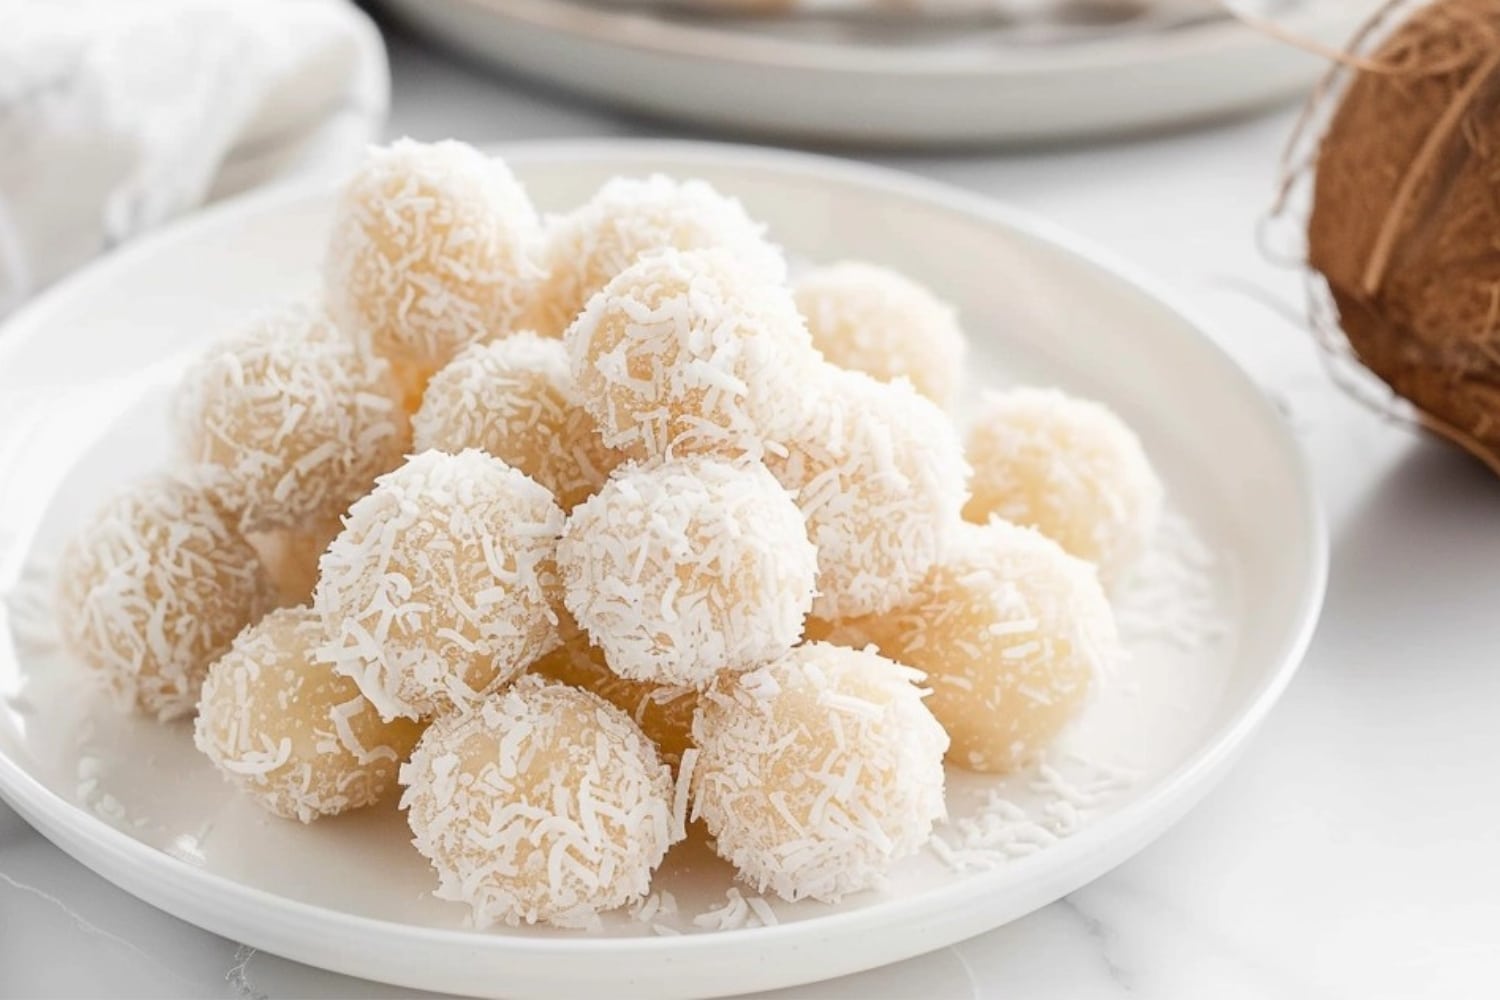 Balls of dessert covered in coconut in a white plate.